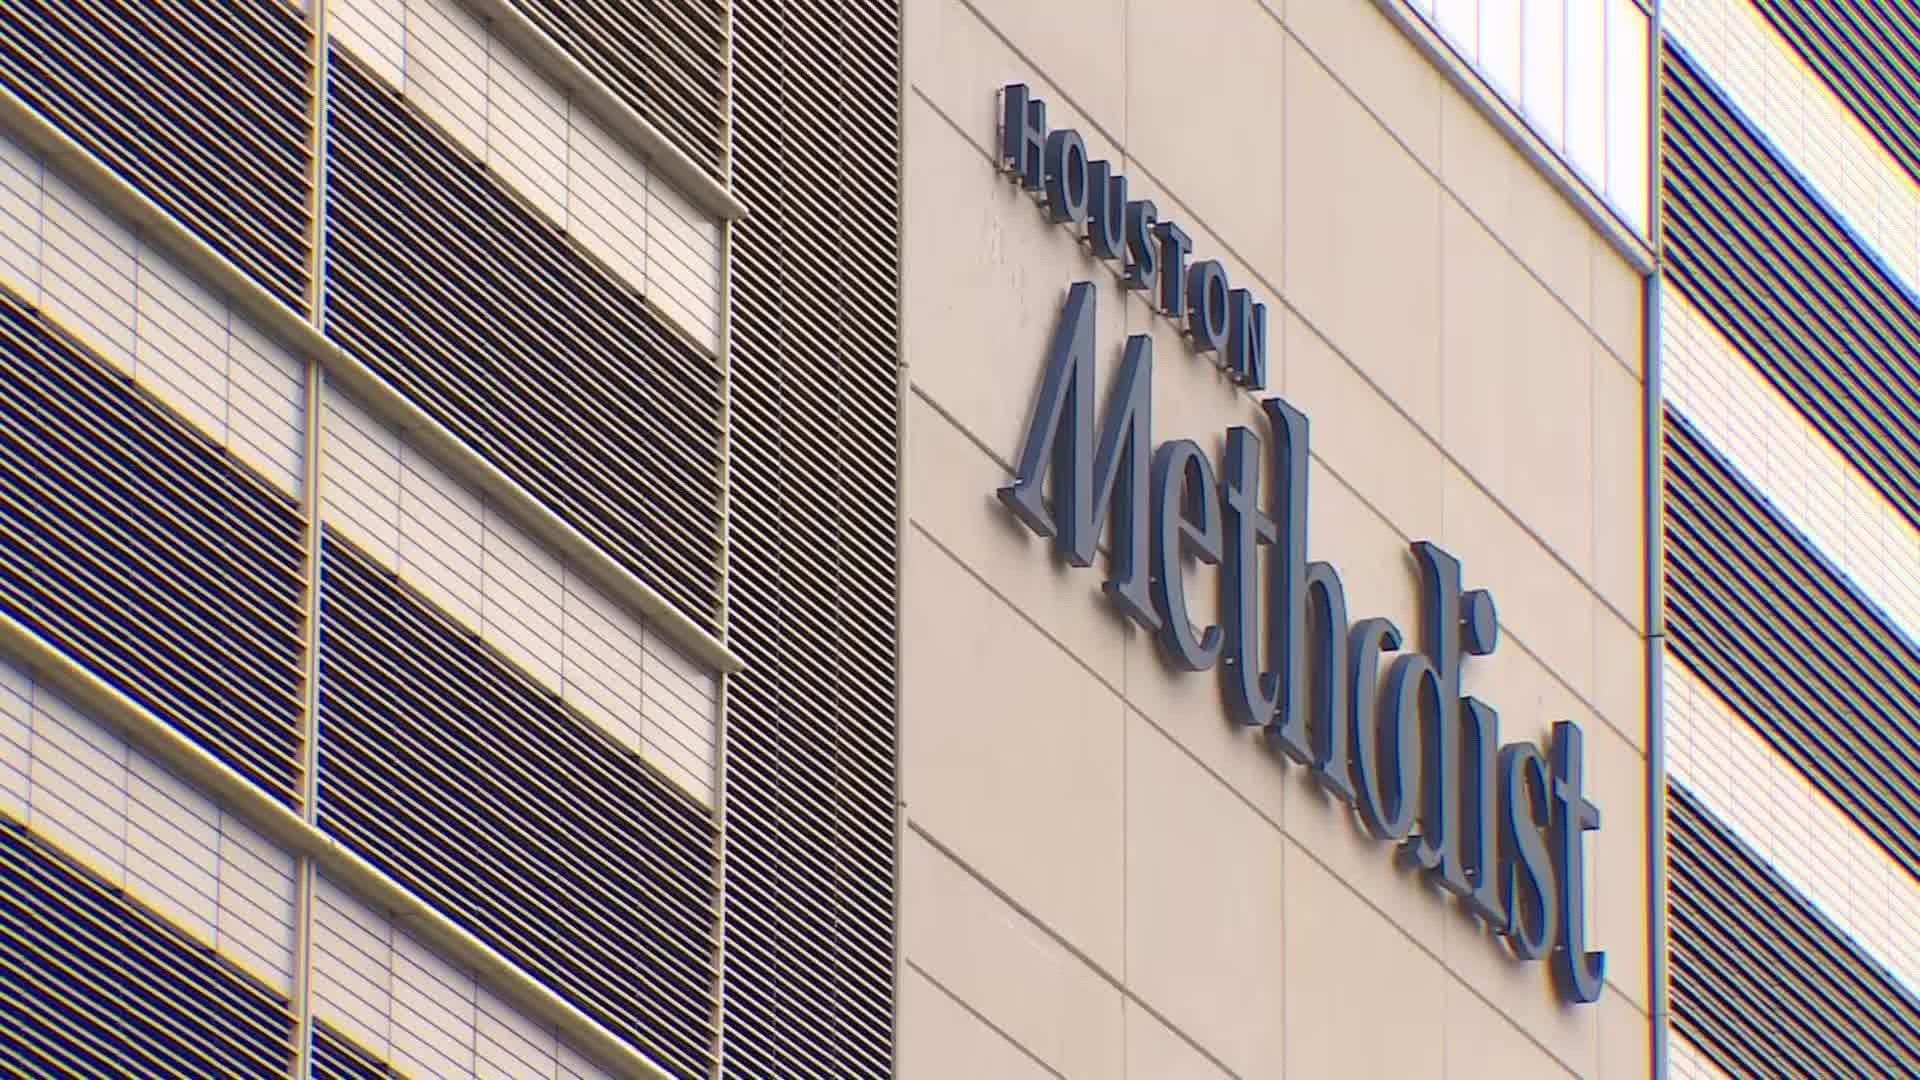 Houston Methodist said the Delta variant is responsible for 97 percent of COVID cases in their hospitals.